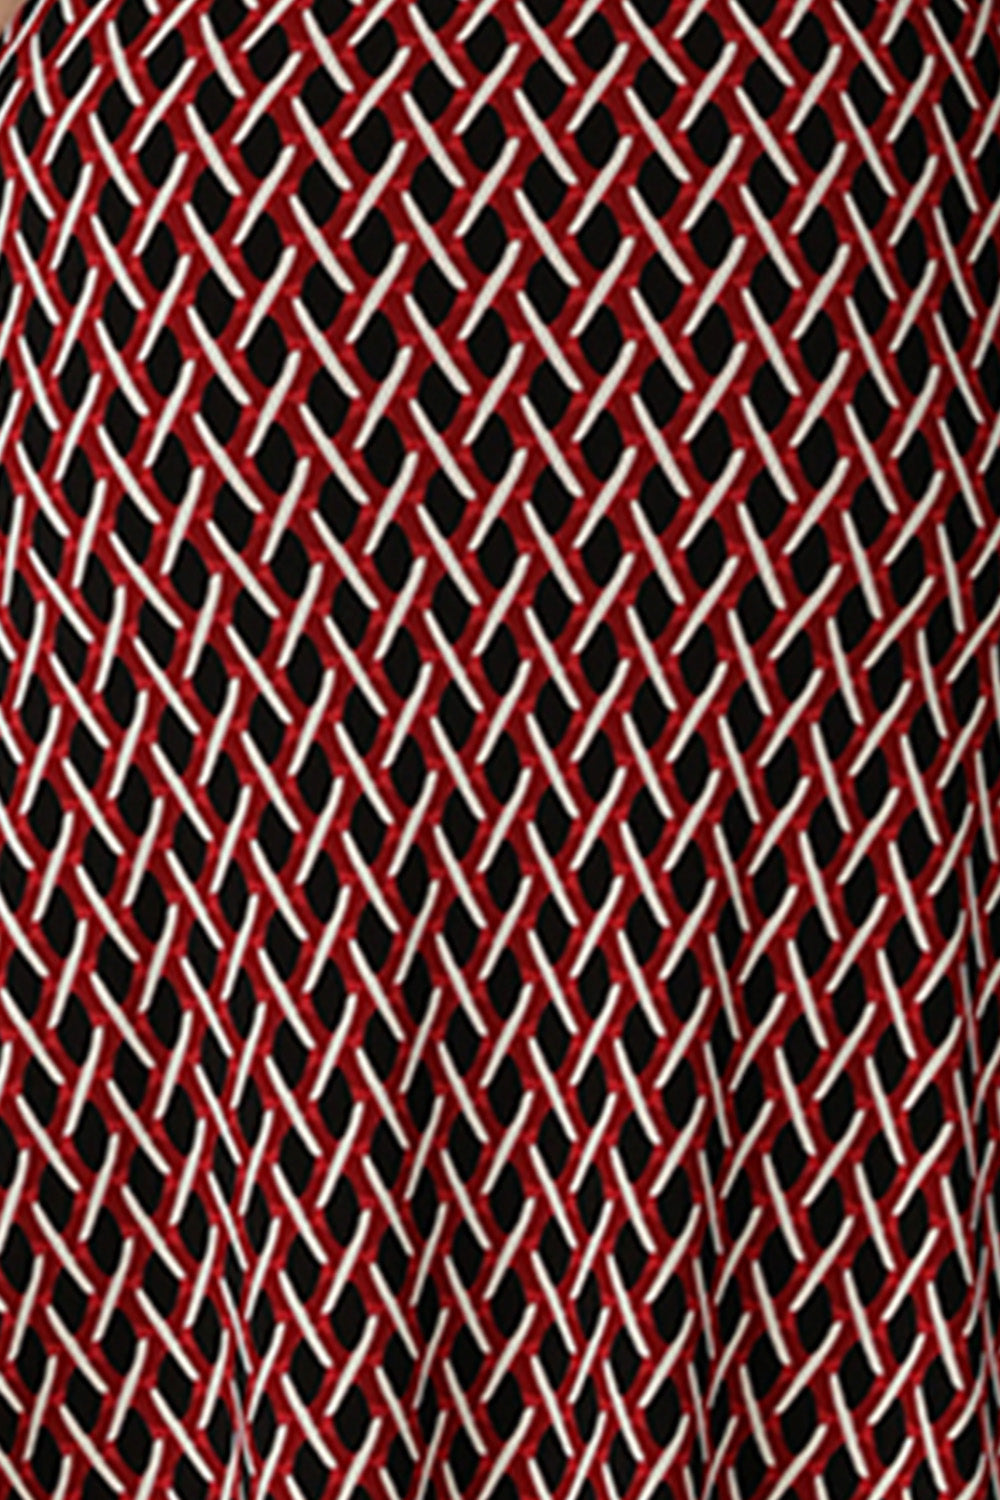 A swatch of red, vanilla and black 'Chevron' print fabric used by Australian fashion brand, Leina & Fleur to make women's work jackets, tops and pants.